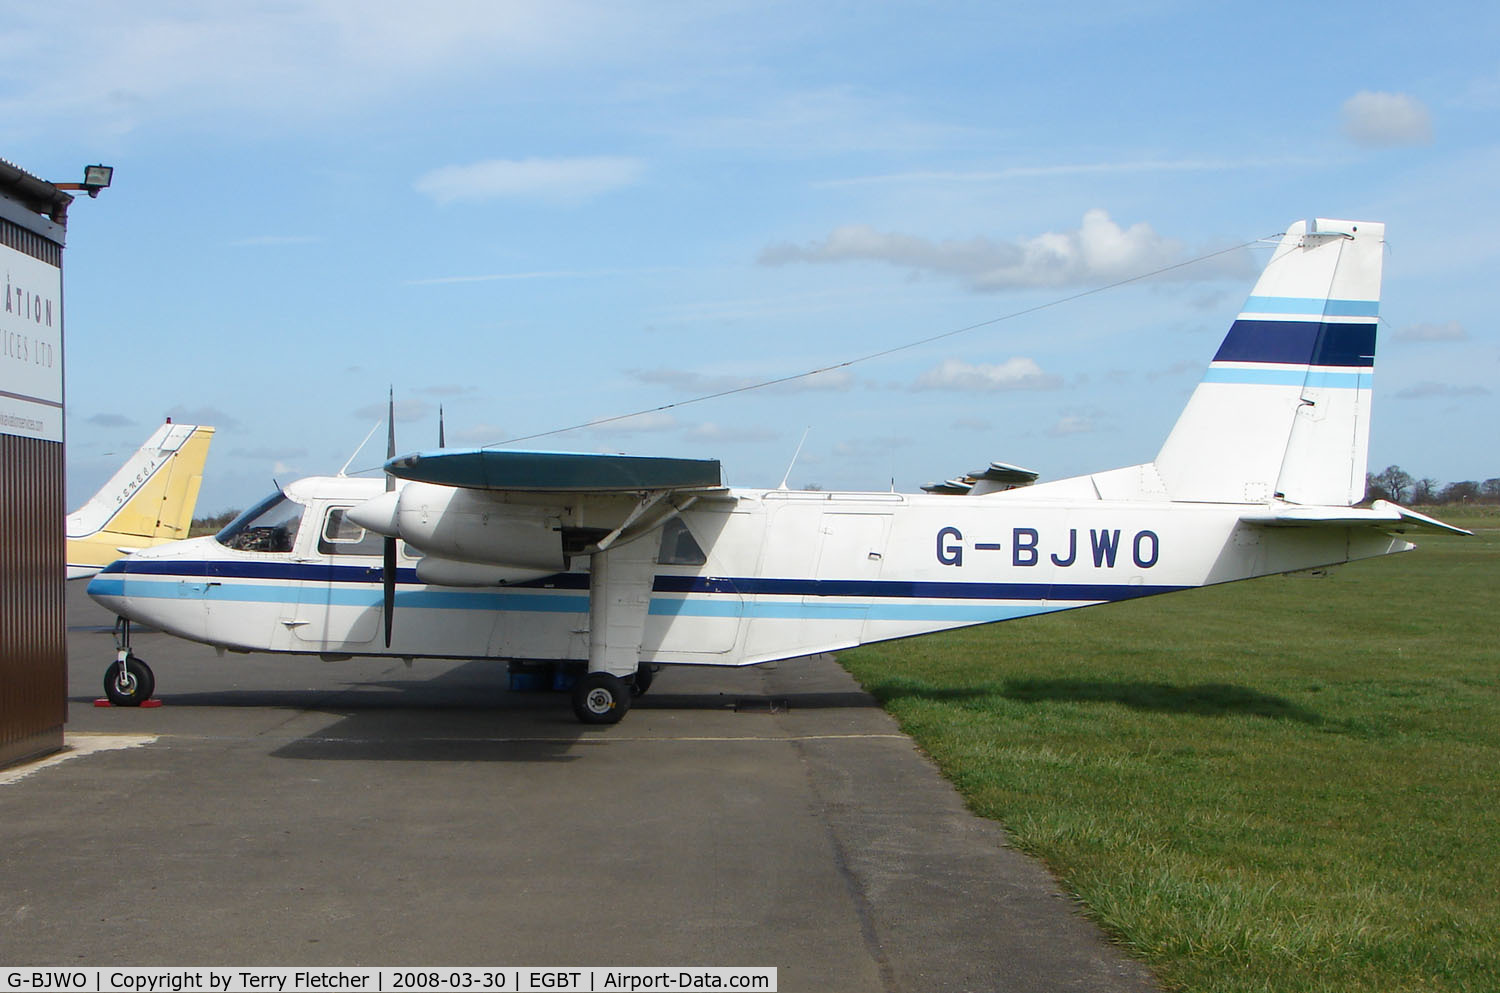 G-BJWO, 1973 Britten-Norman BN-2A-26 Islander C/N 334, The Buckinghamshire airfield at Turweston always has a good variety of aircraft movements